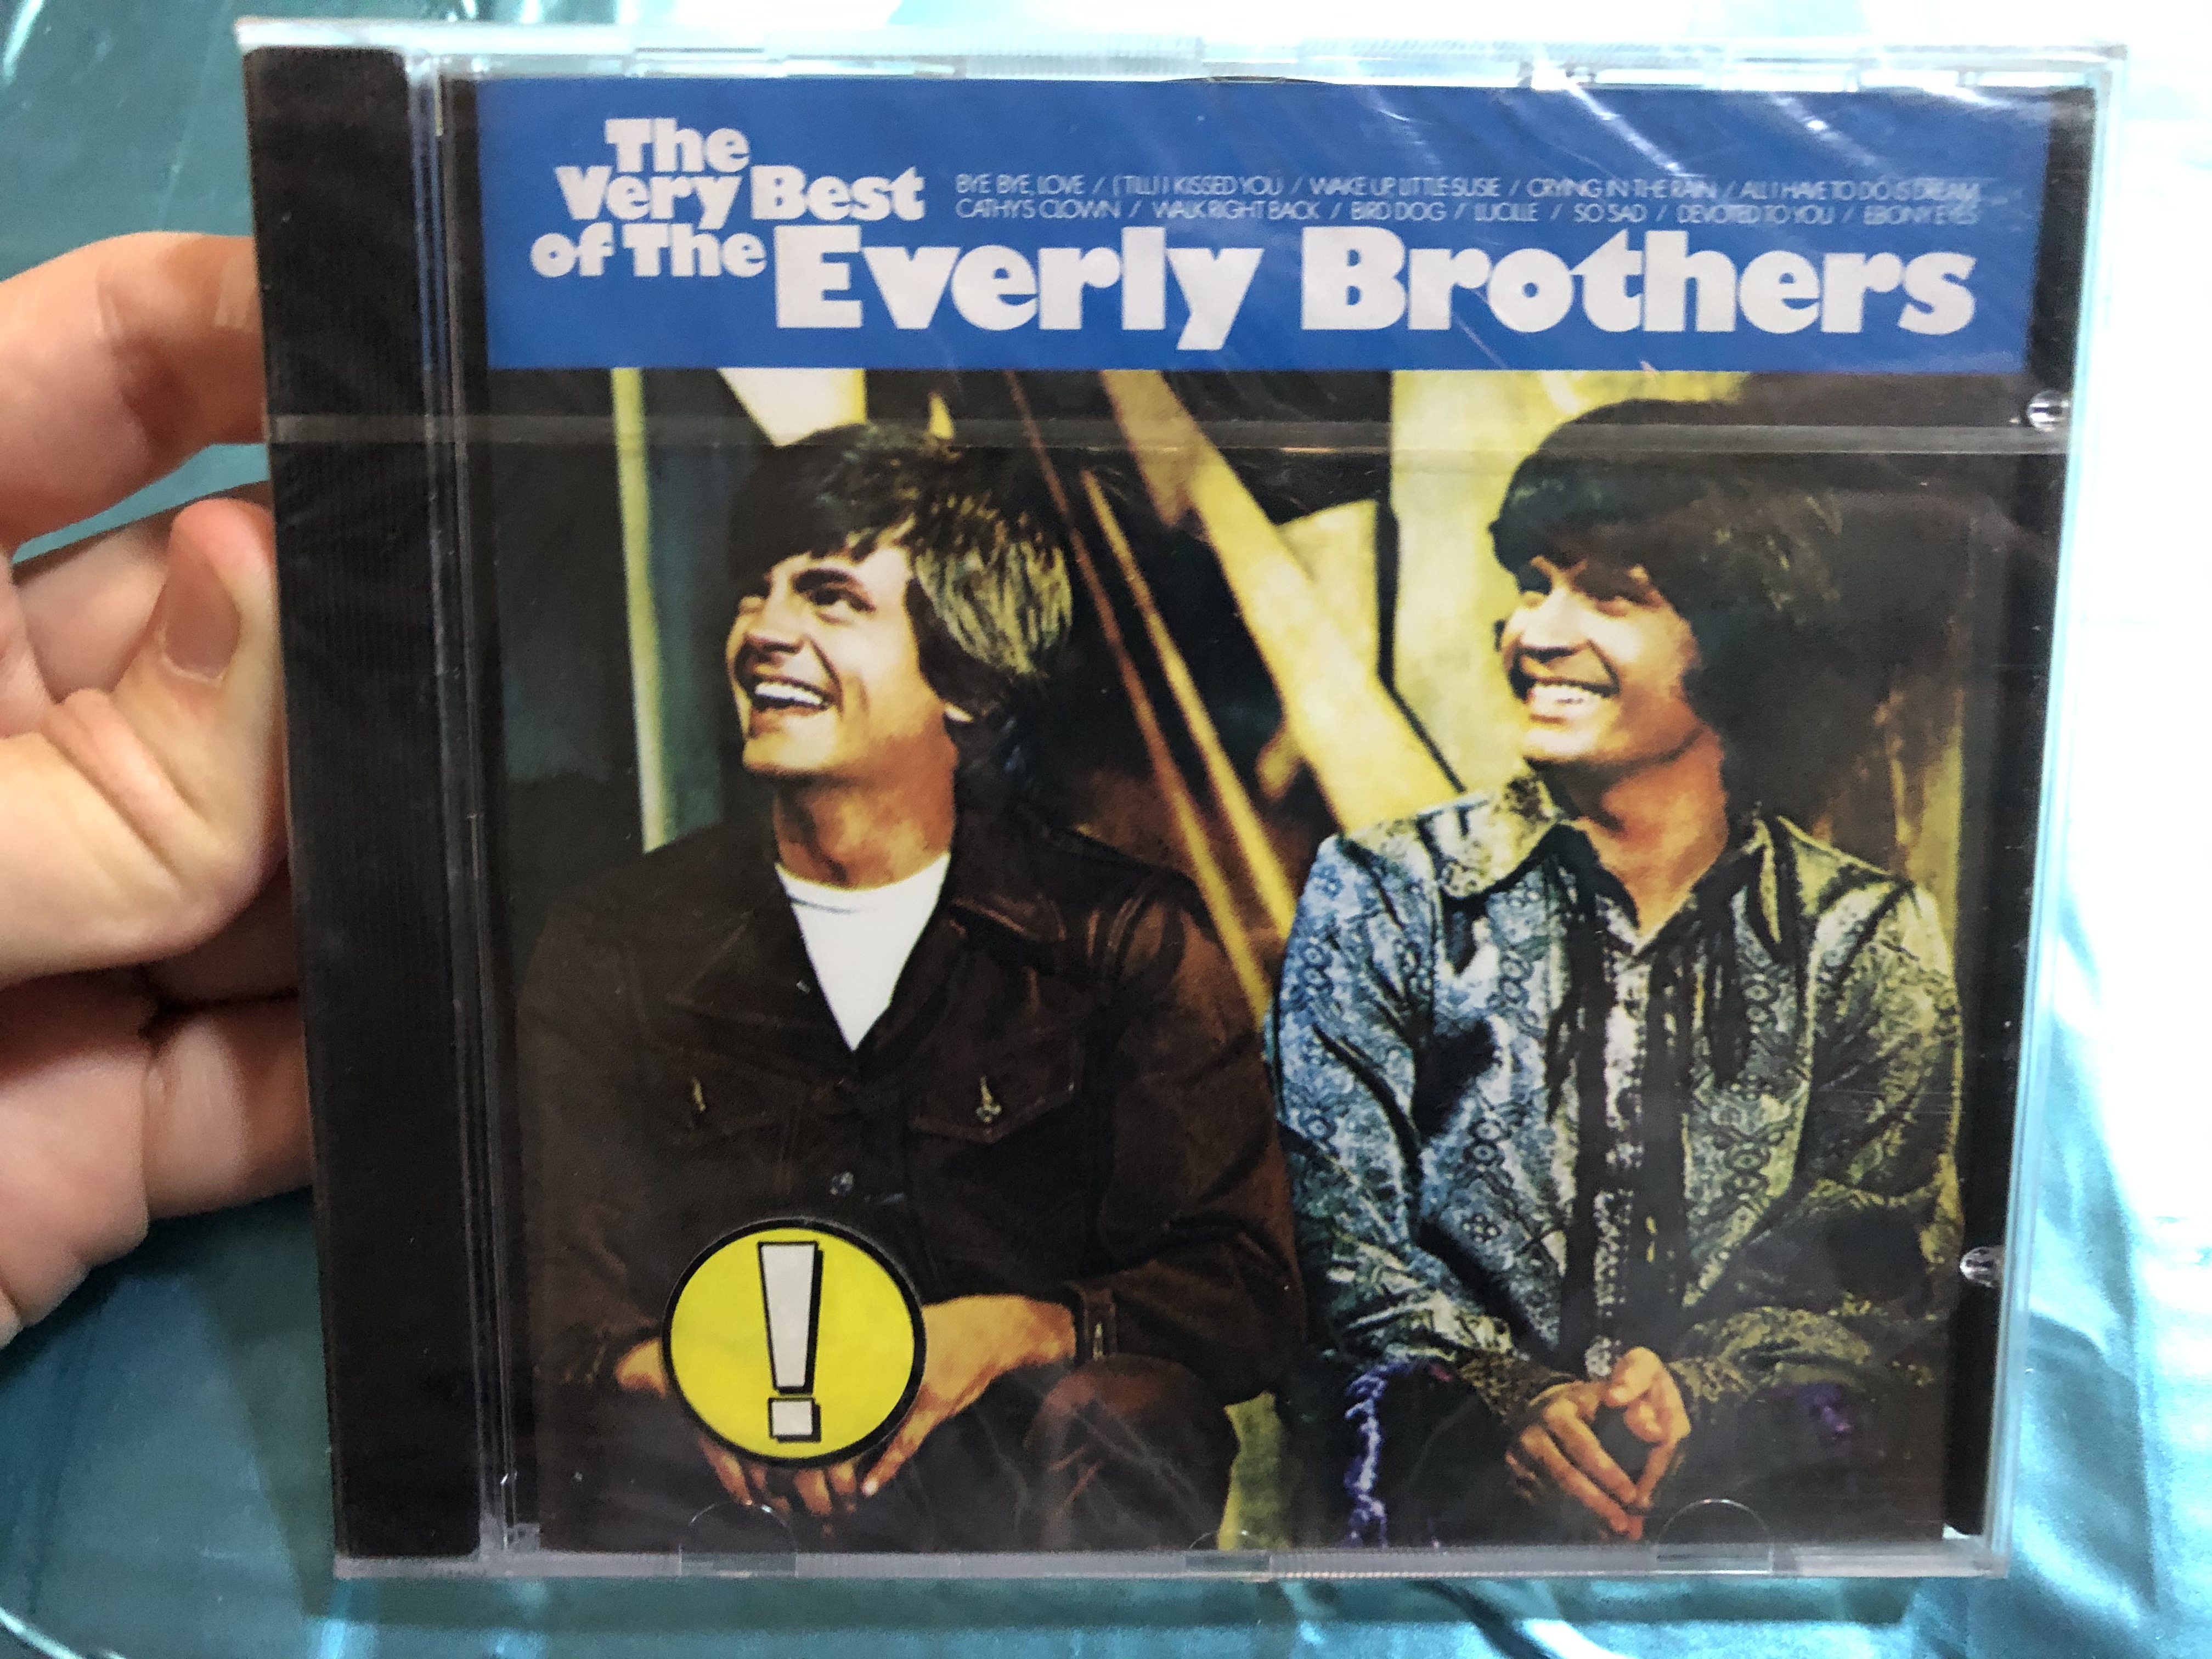 the-very-best-of-the-everly-brothers-bye-bye-love-til-i-kissed-you-wake-up-little-susie-crying-in-the-rain-all-i-have-to-do-is-dream-cathy-s-clown-walk-right-back-bird-dog-lucille-1-.jpg